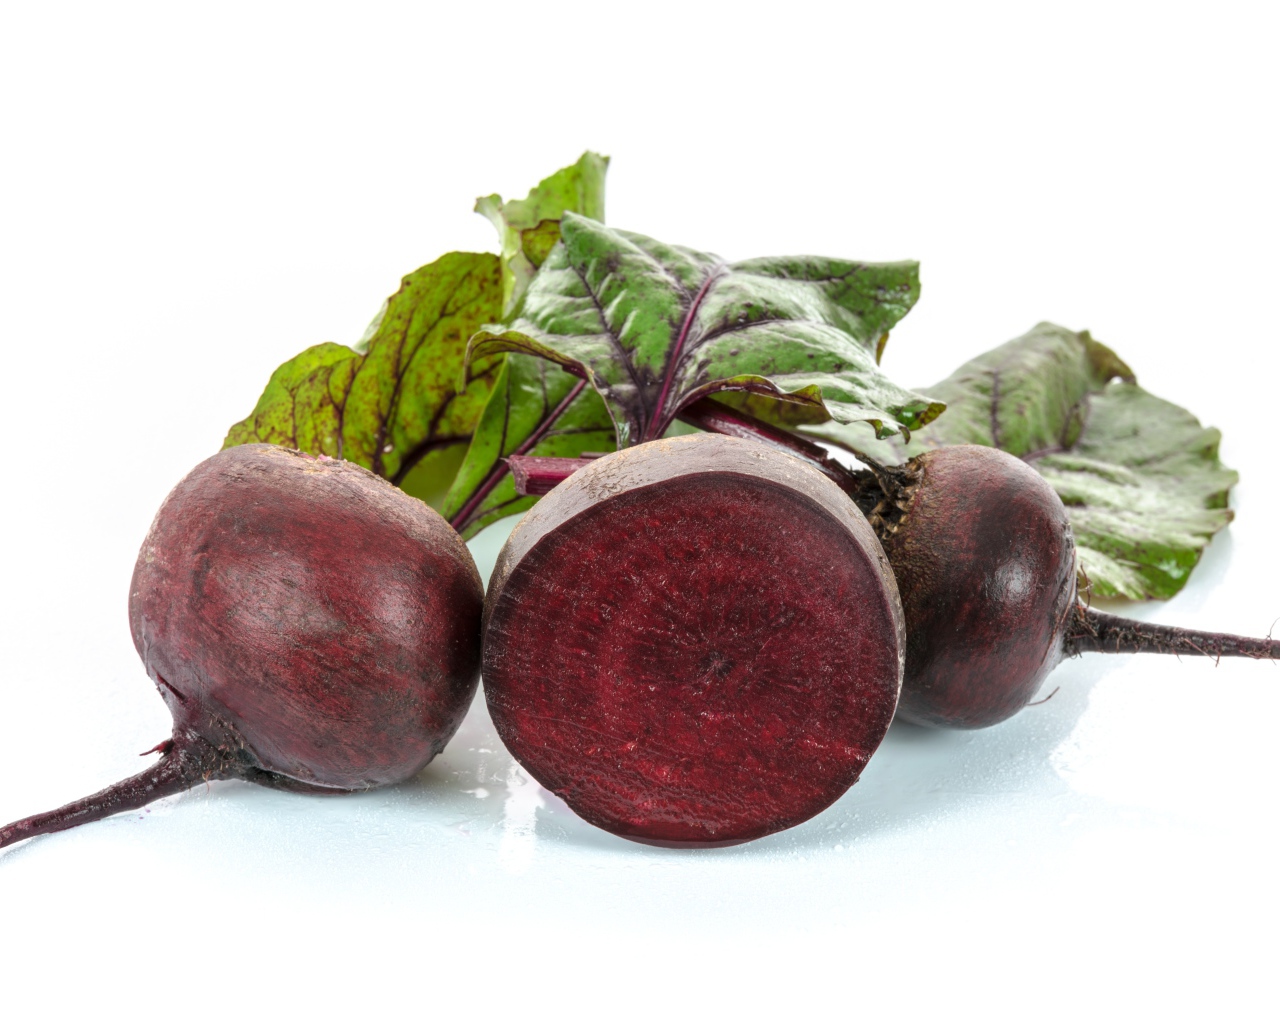 Beets with green leaves on a white background